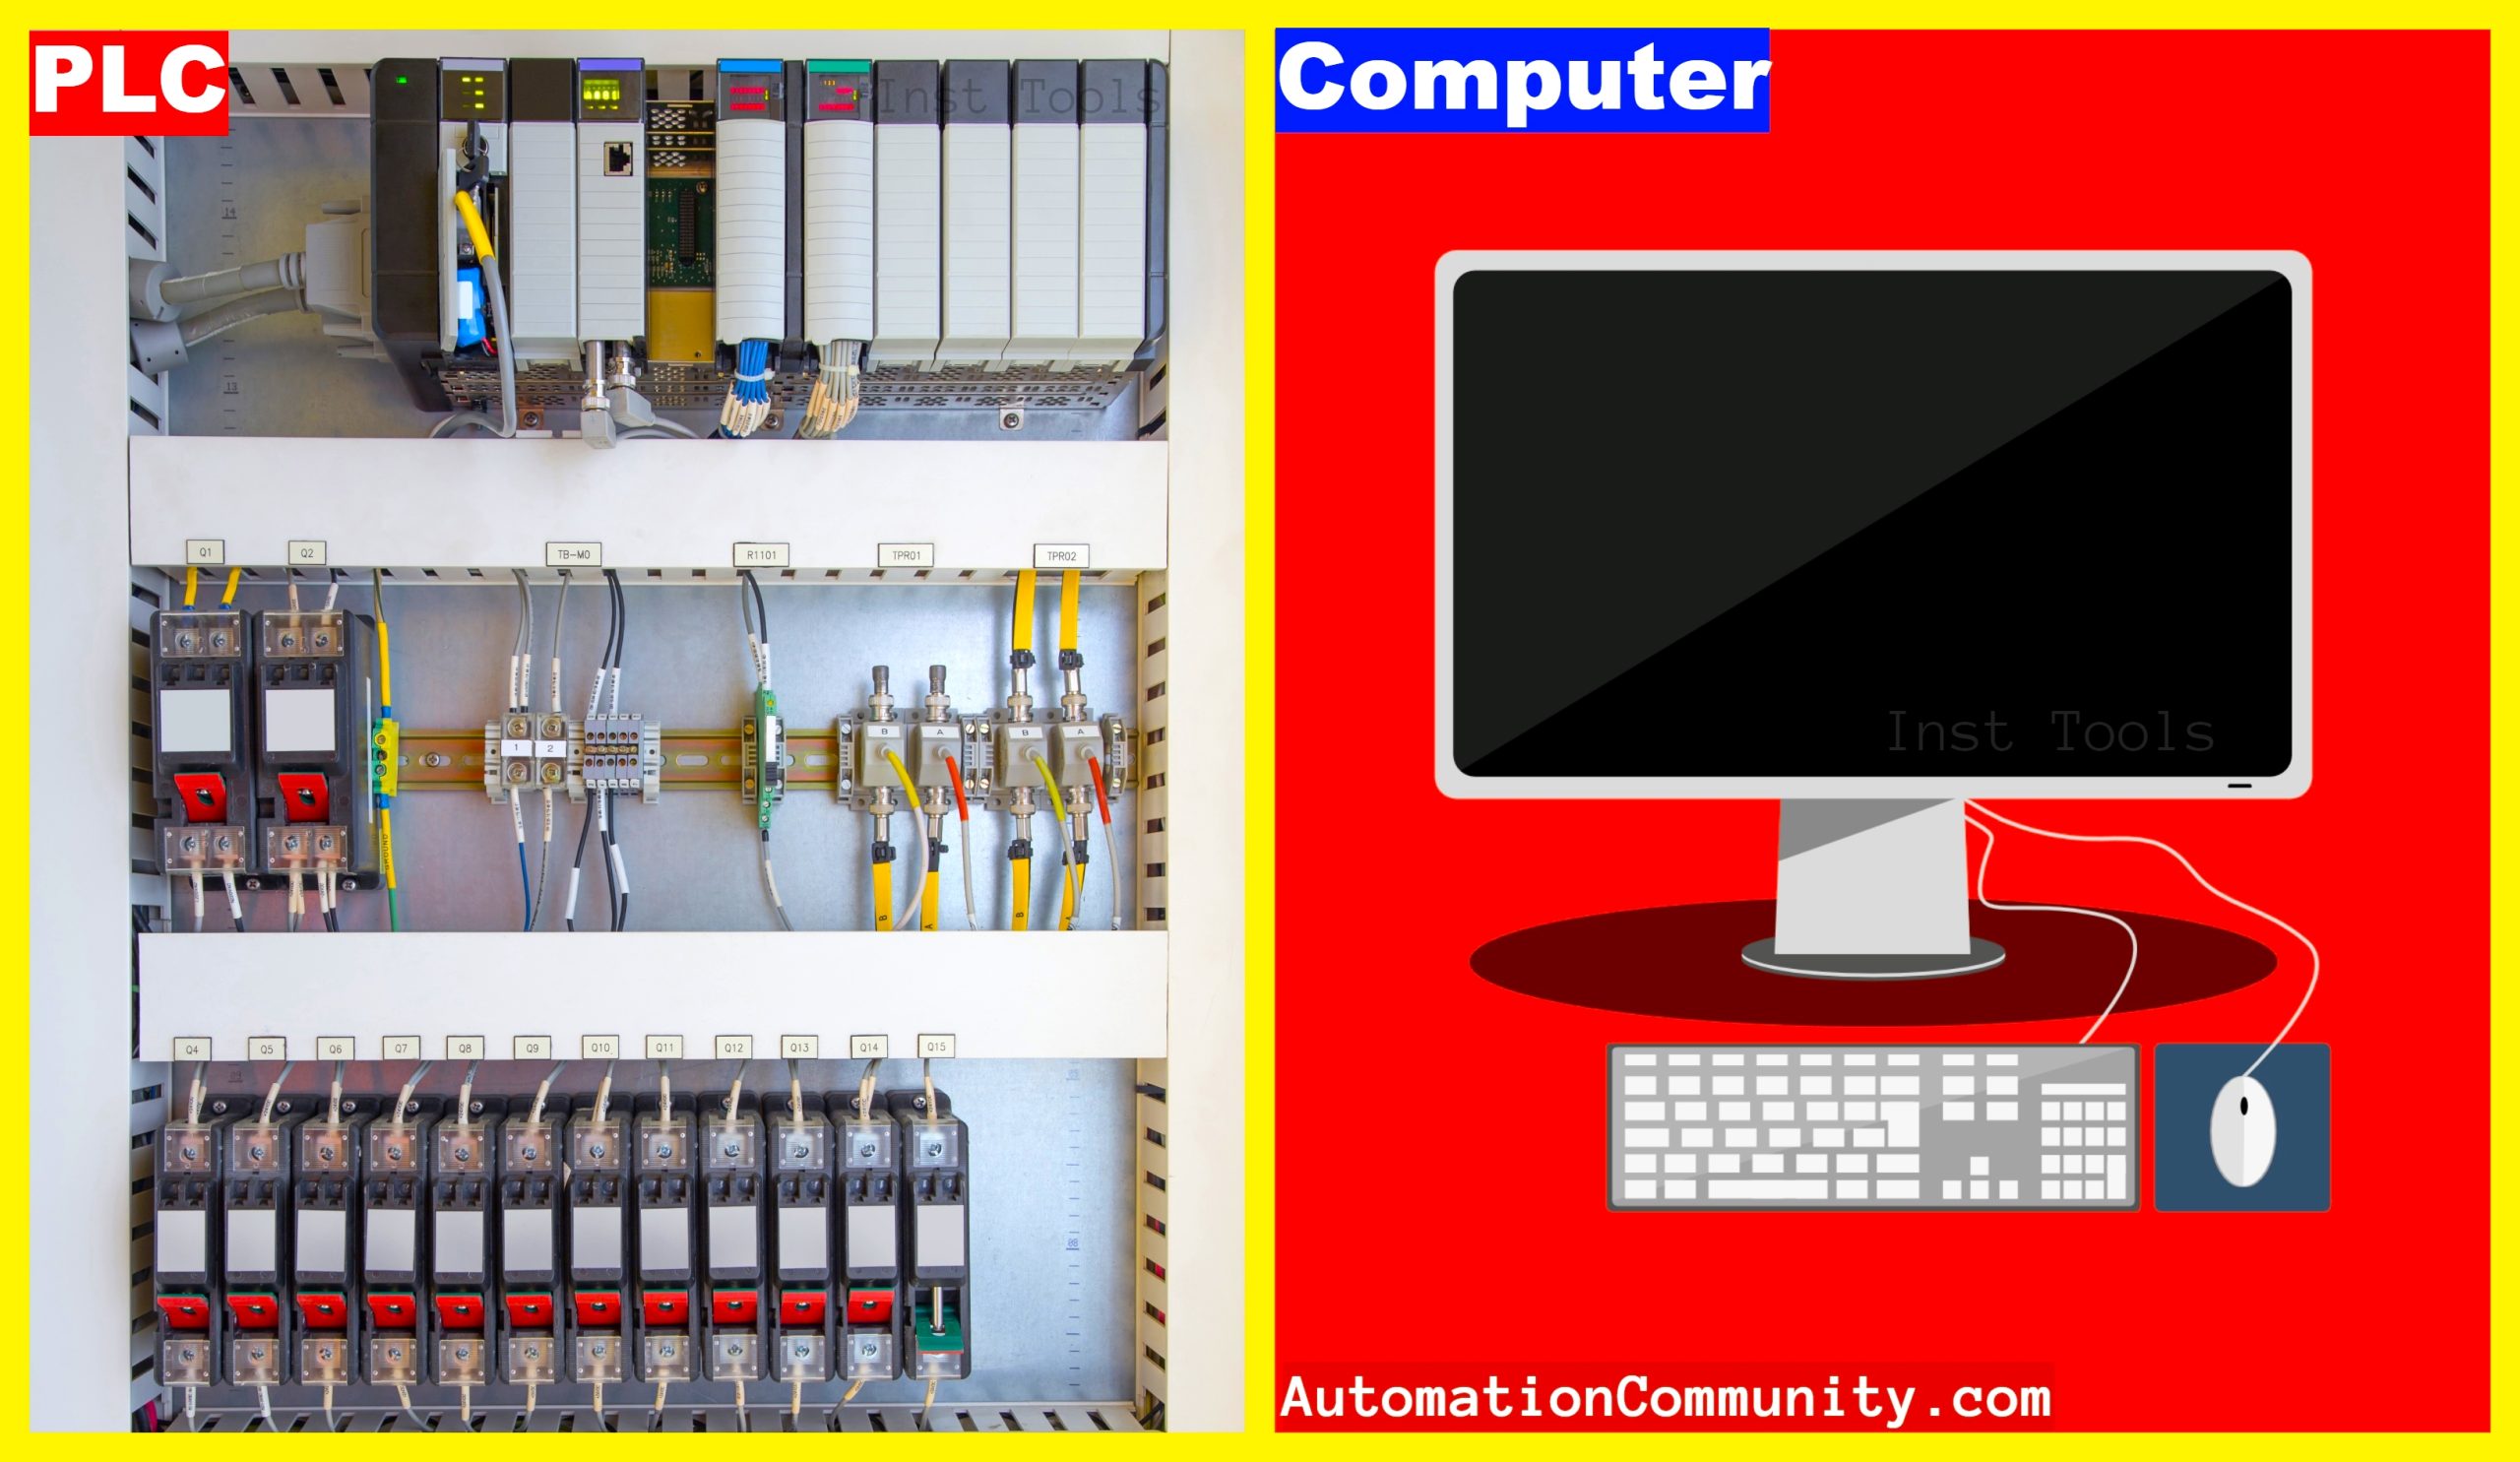 Difference Between PLC and Personal Computer